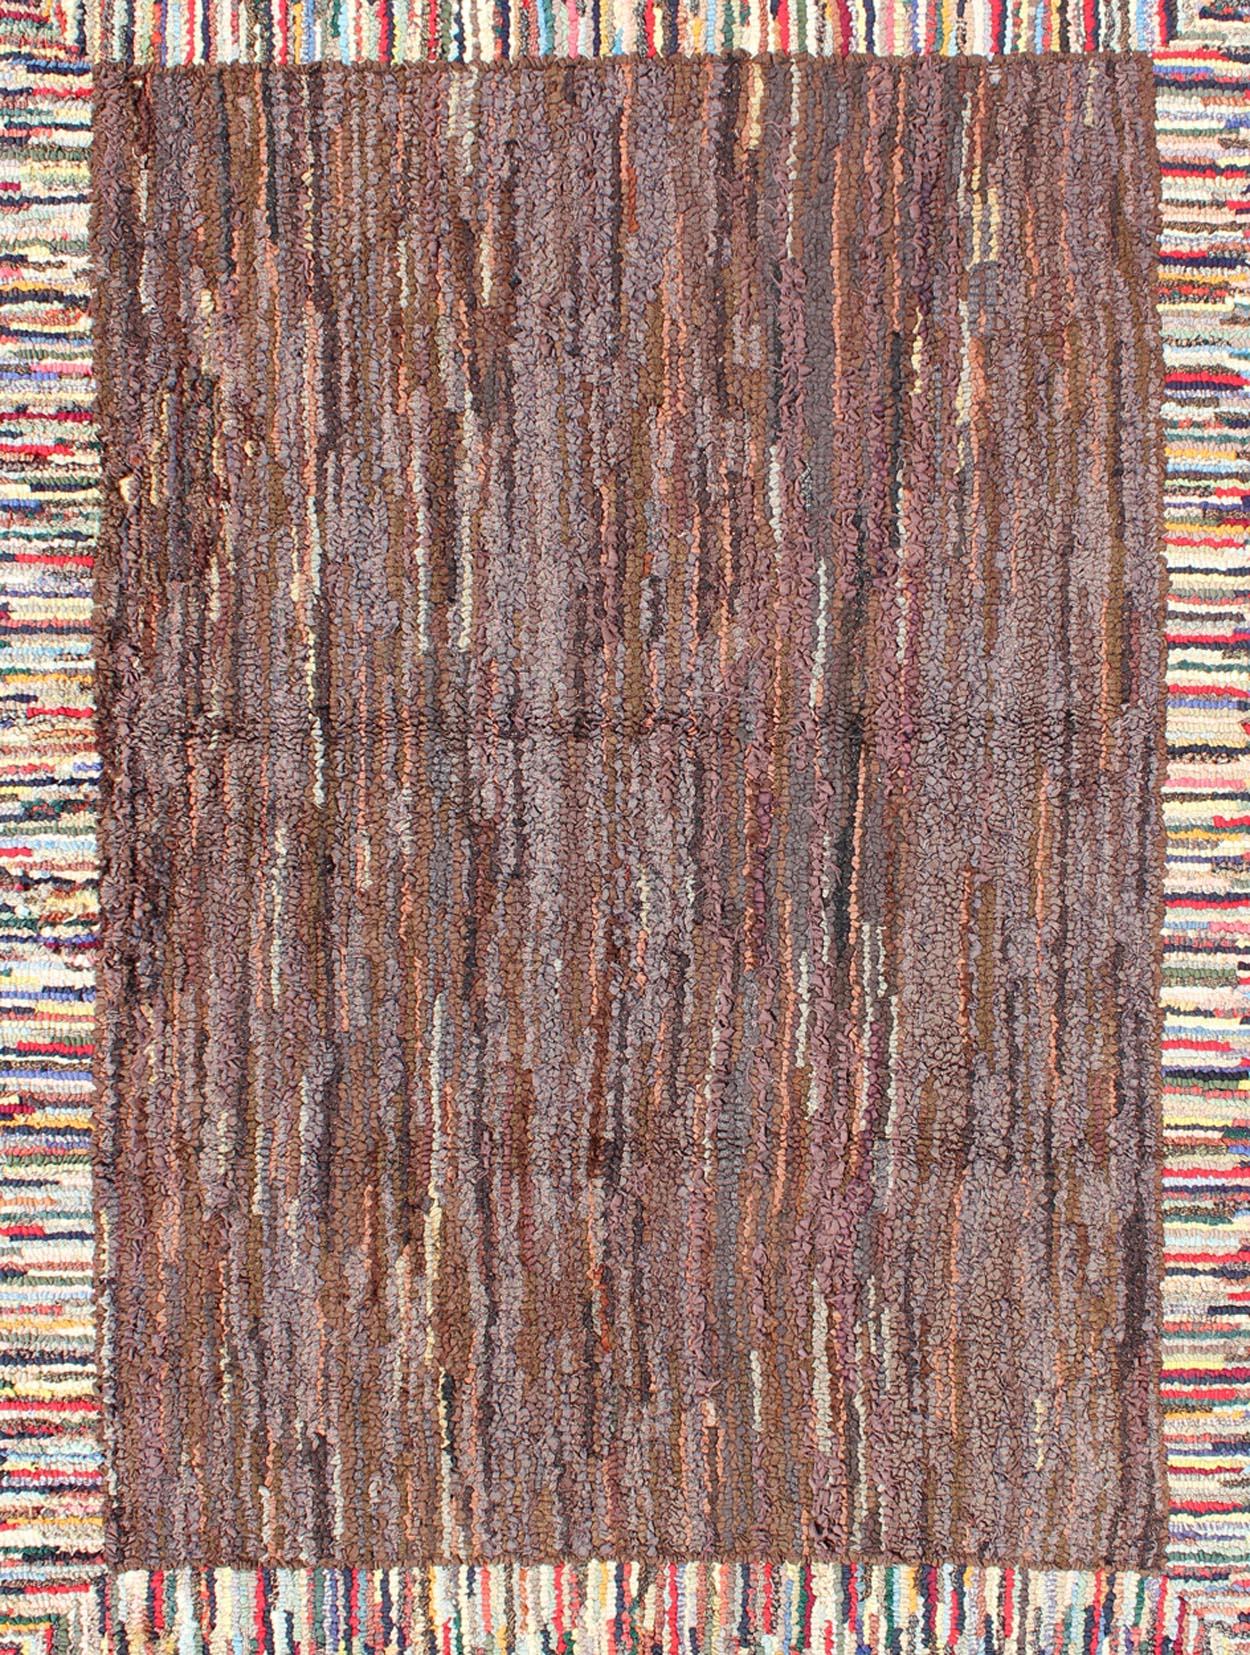 Hand-Woven Antique American Hooked Rug with Colorful Variegated Design